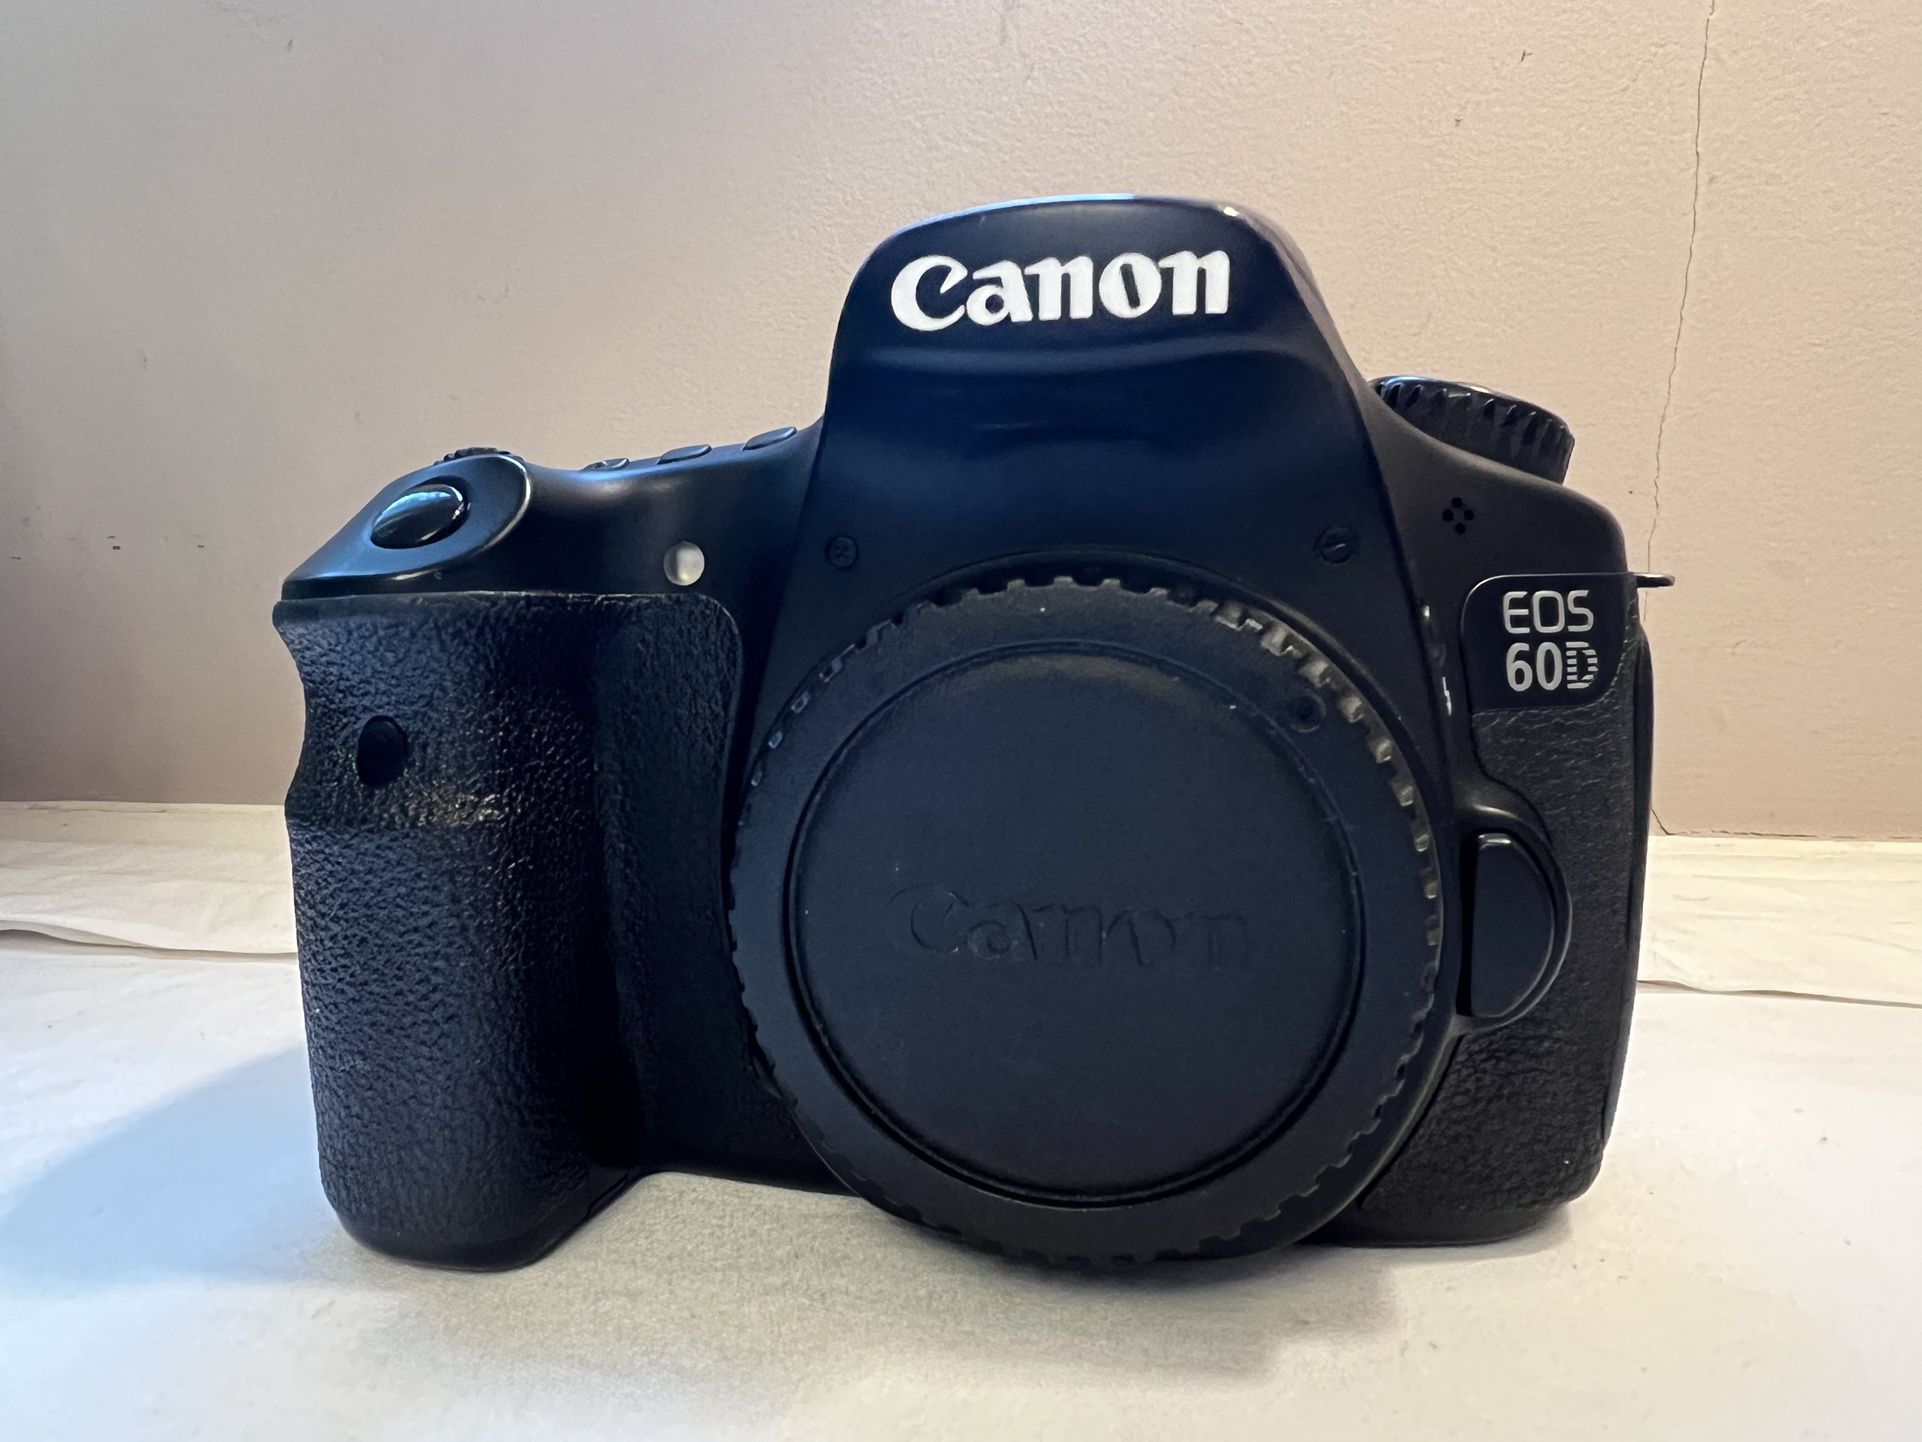 Camera - Canon EOS 60D - Body Only (Lens Not Included)